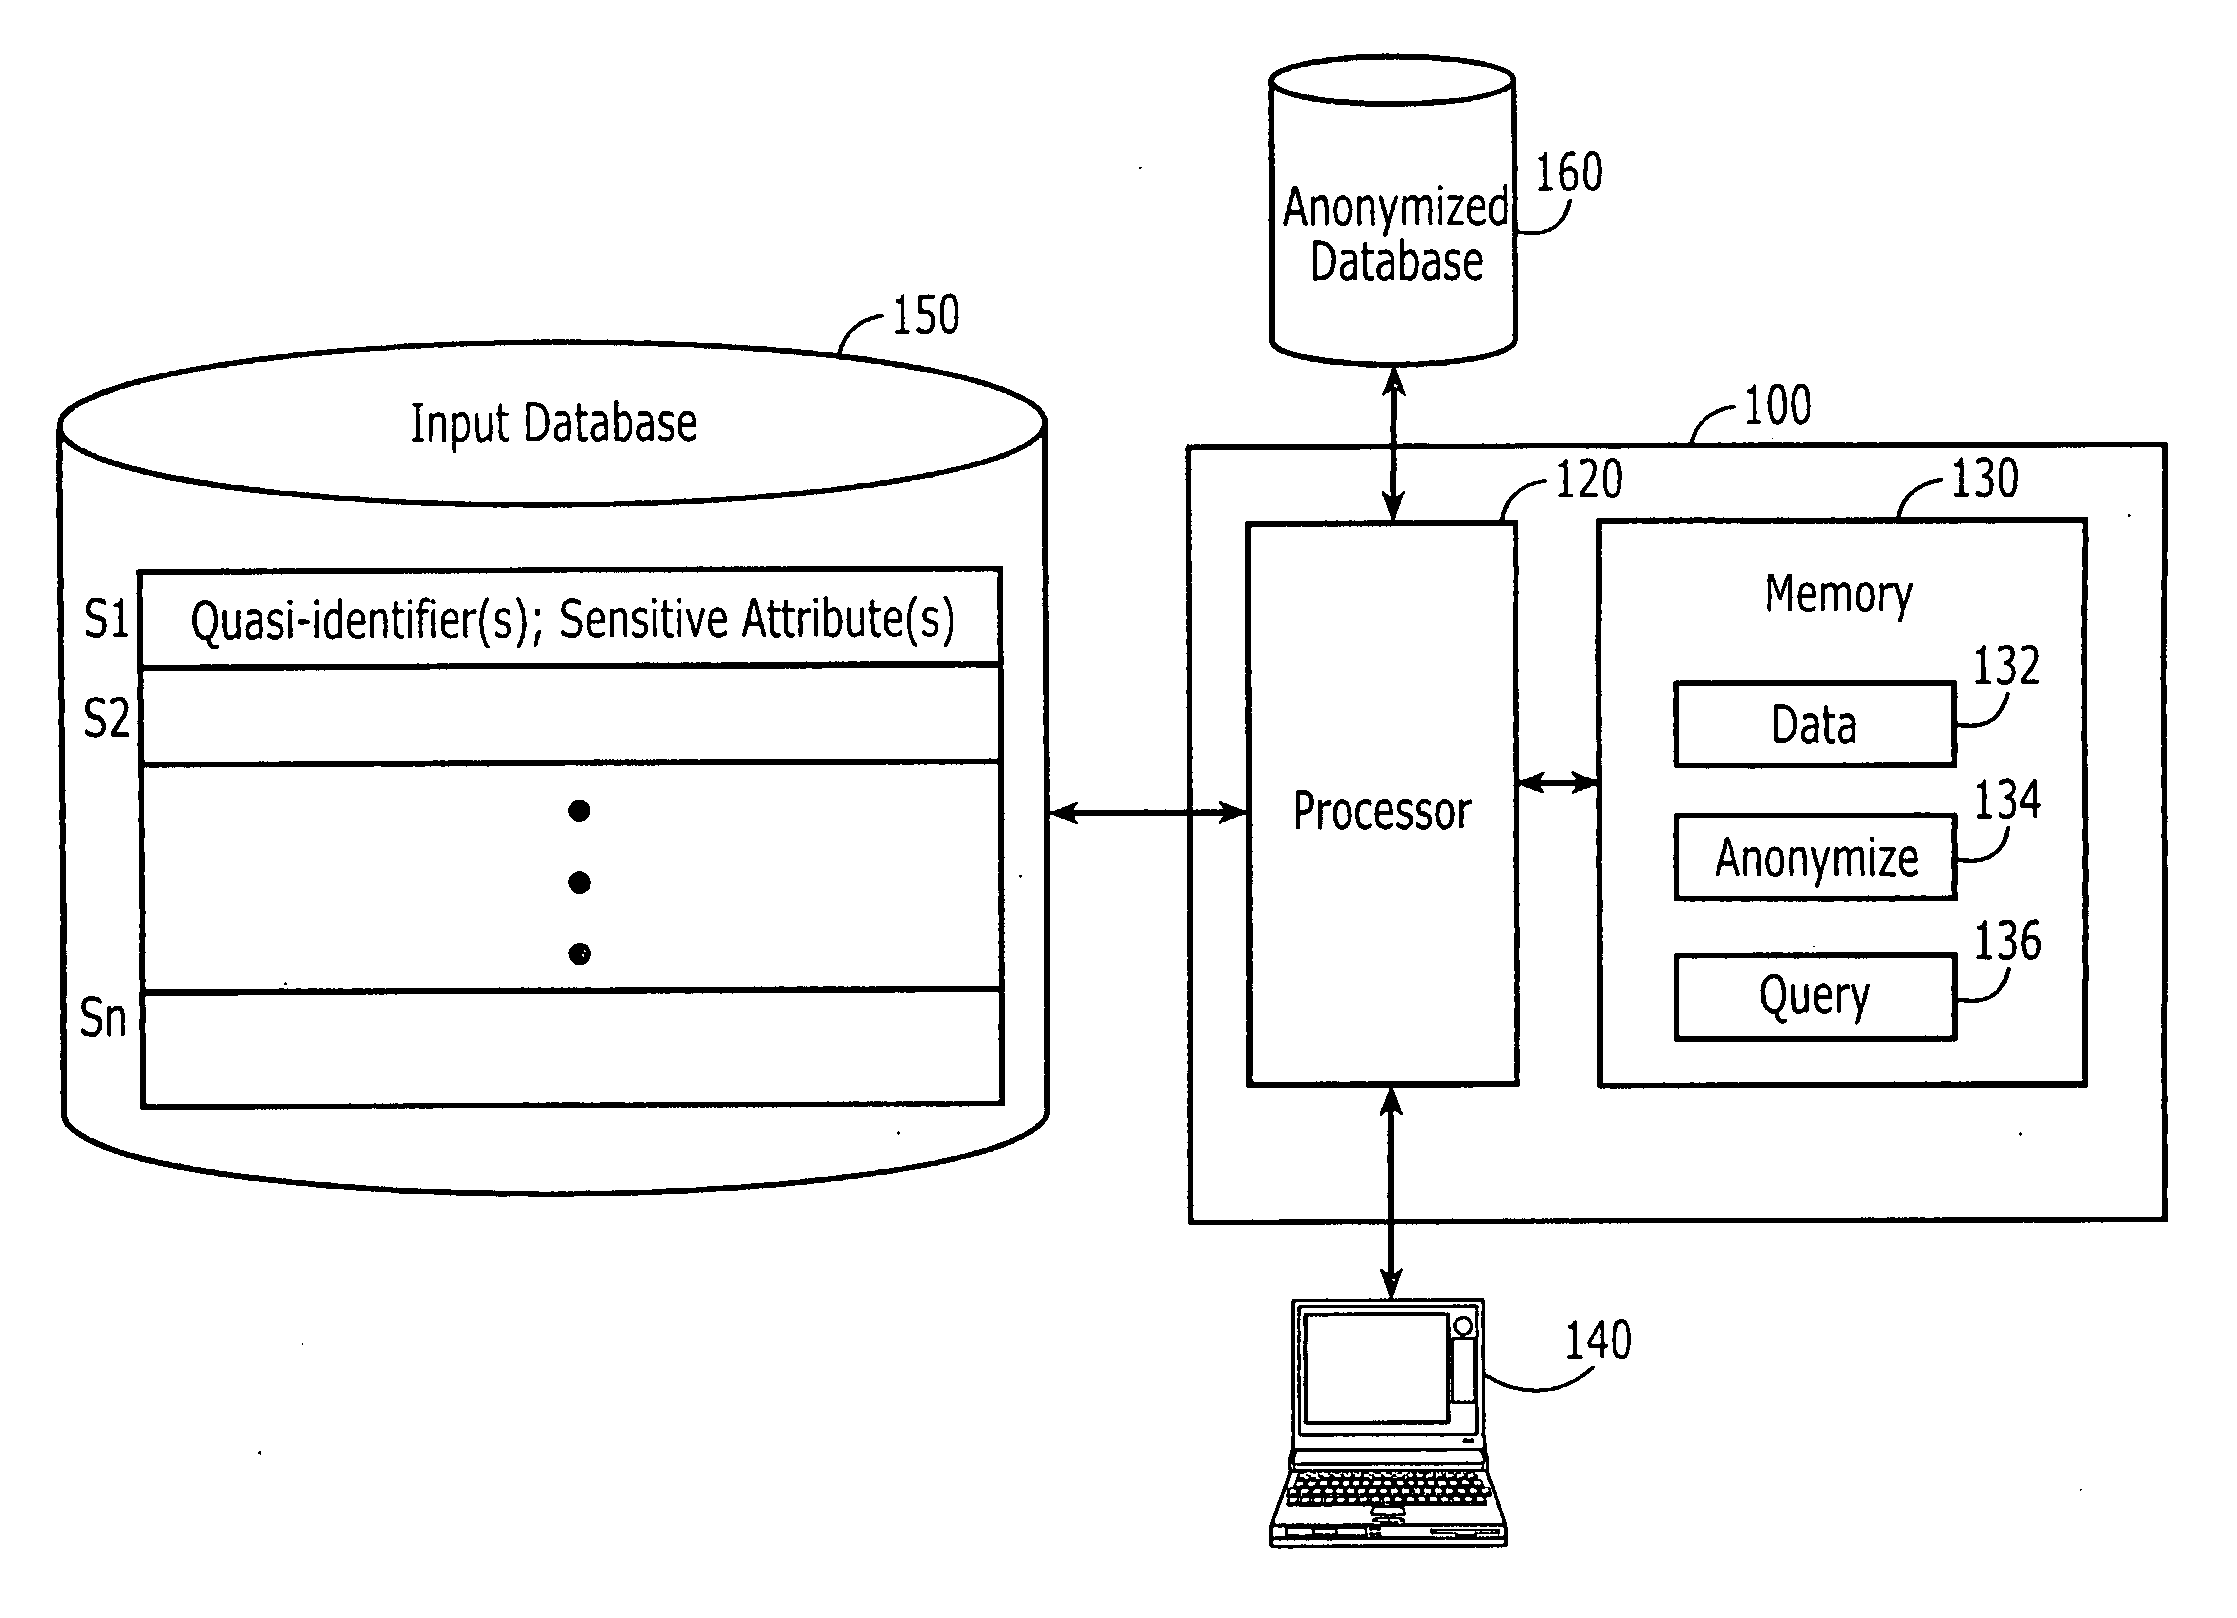 Computer systems, methods and computer program products for data anonymization for aggregate query answering